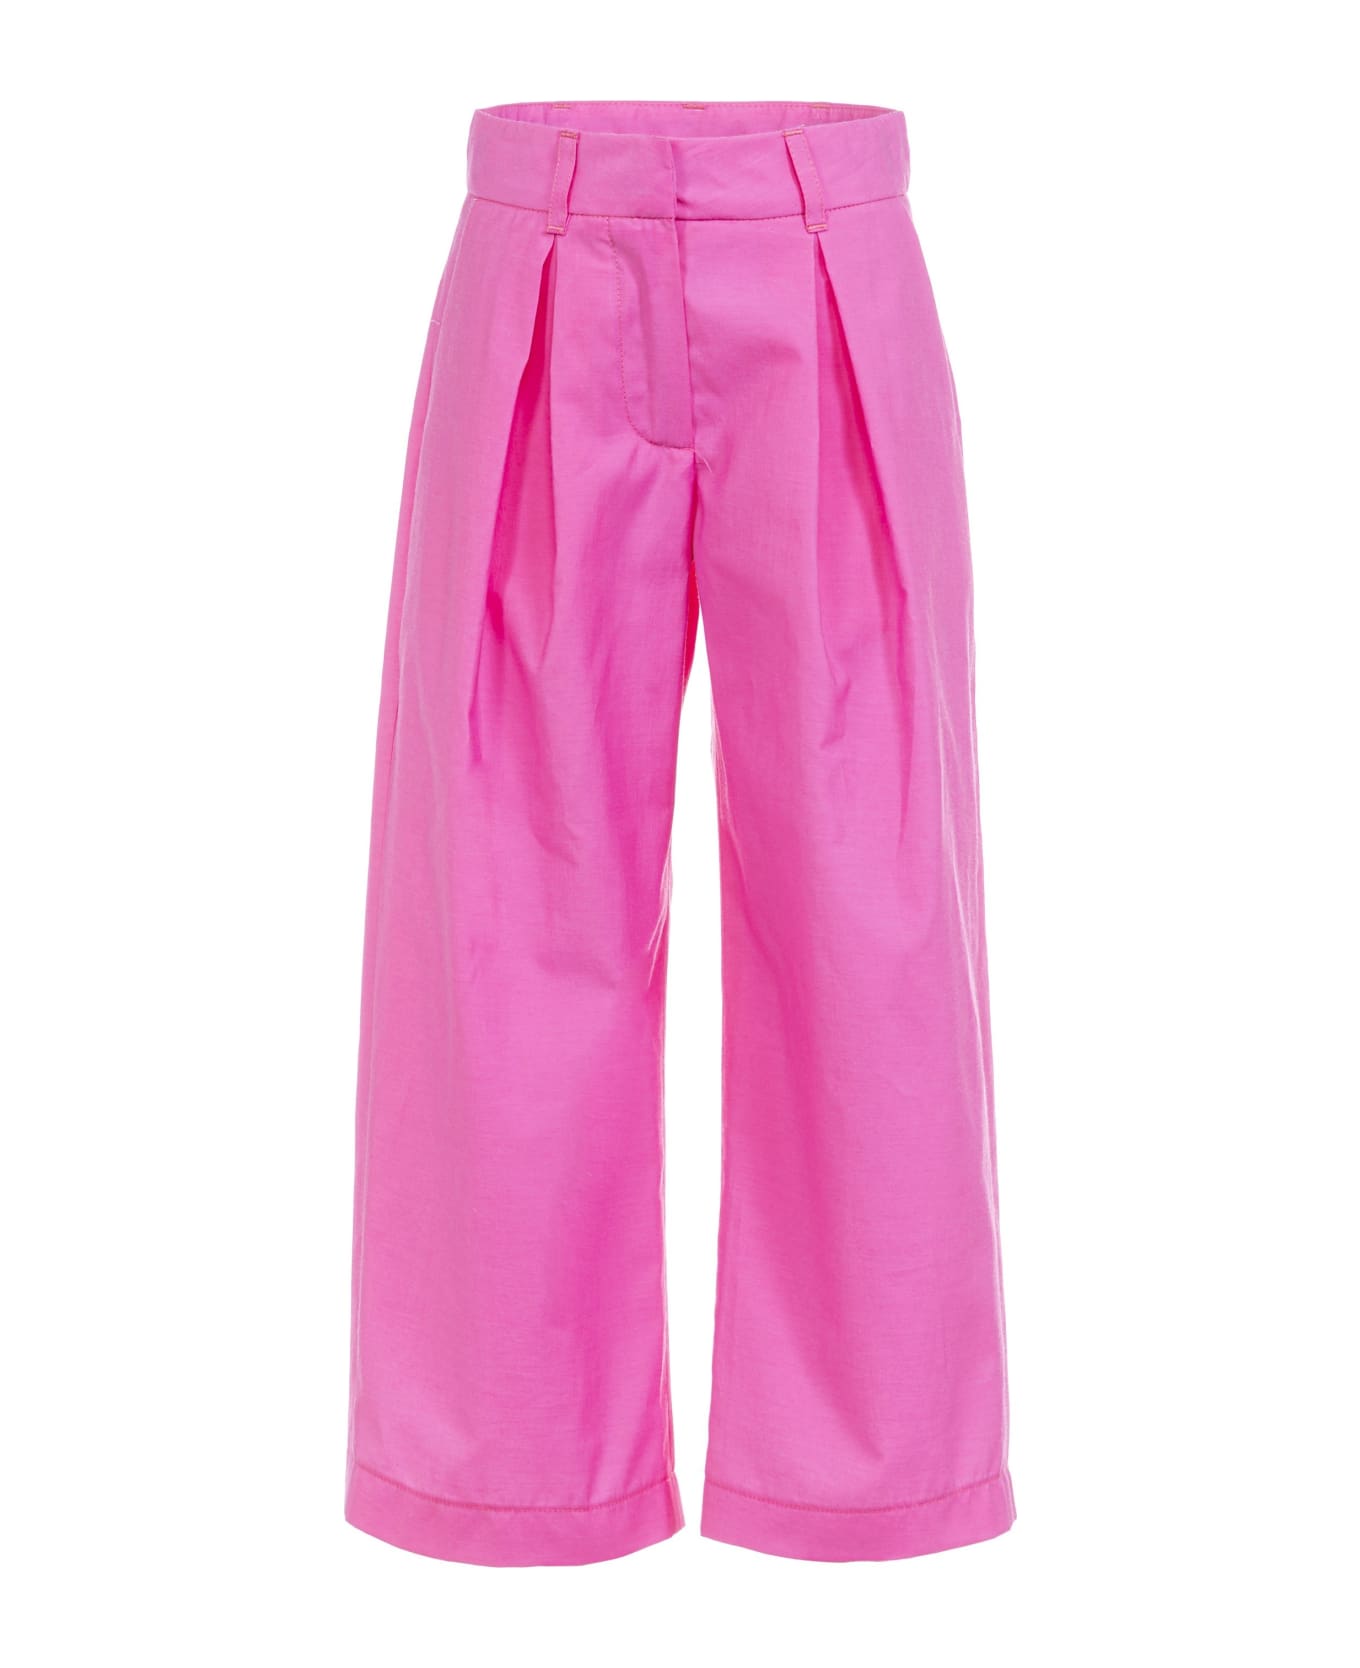 Pucci High Waisted Trousers - Fucsia